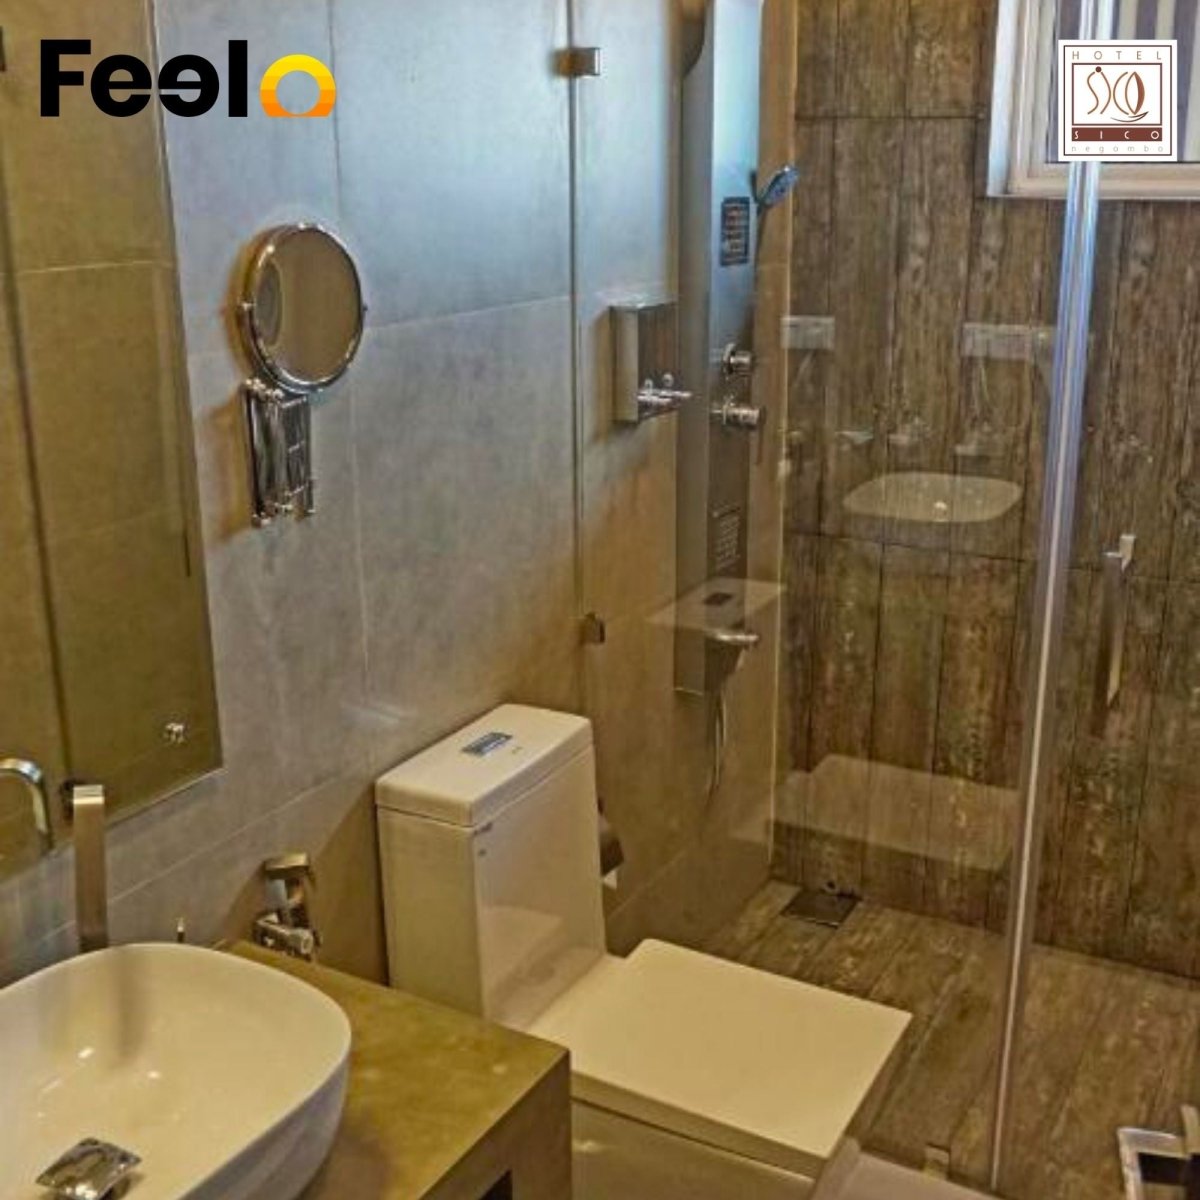 Day-stay, 1x Night stay, or 2x Night stay at Hotel Sico in Negombo for 2 people - Hotel Sico, Negombo | Feelo